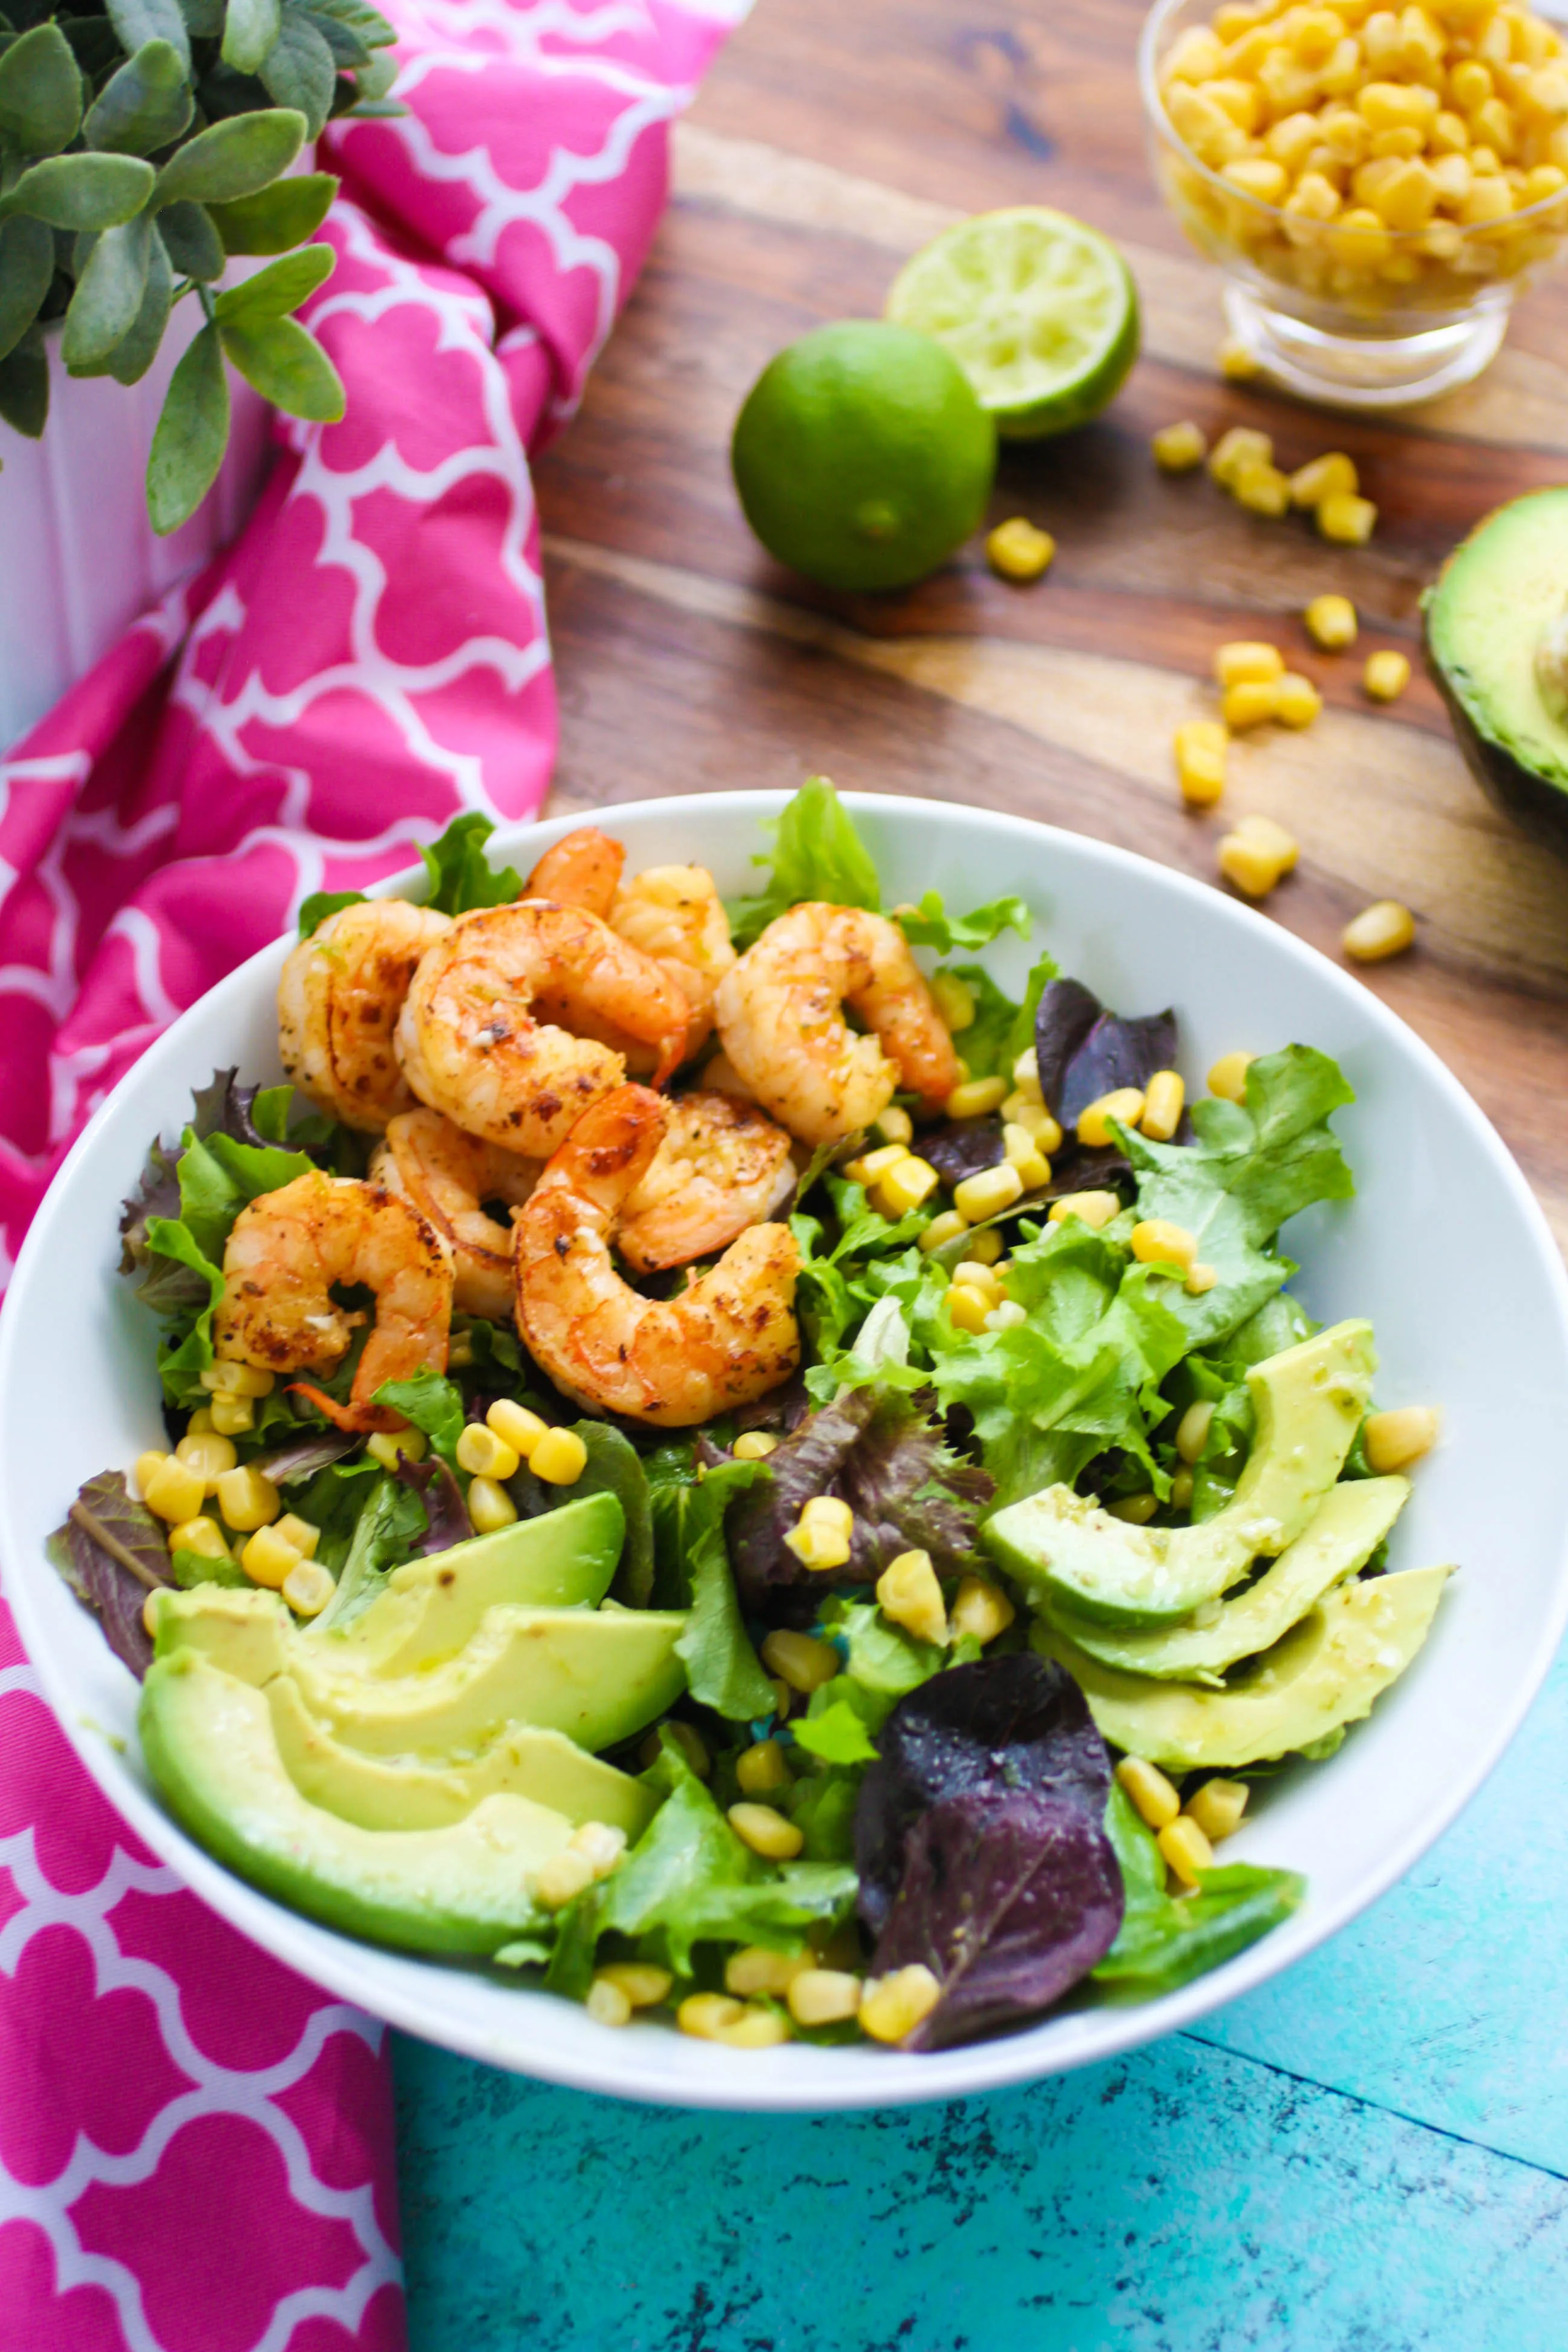 Simple Skillet Shrimp Salad with Lime Vinaigrette is a delicious salad for any meal. Simple Skillet Shrimp Salad with Lime Vinaigrette is an easy-to-make dish you'll love.